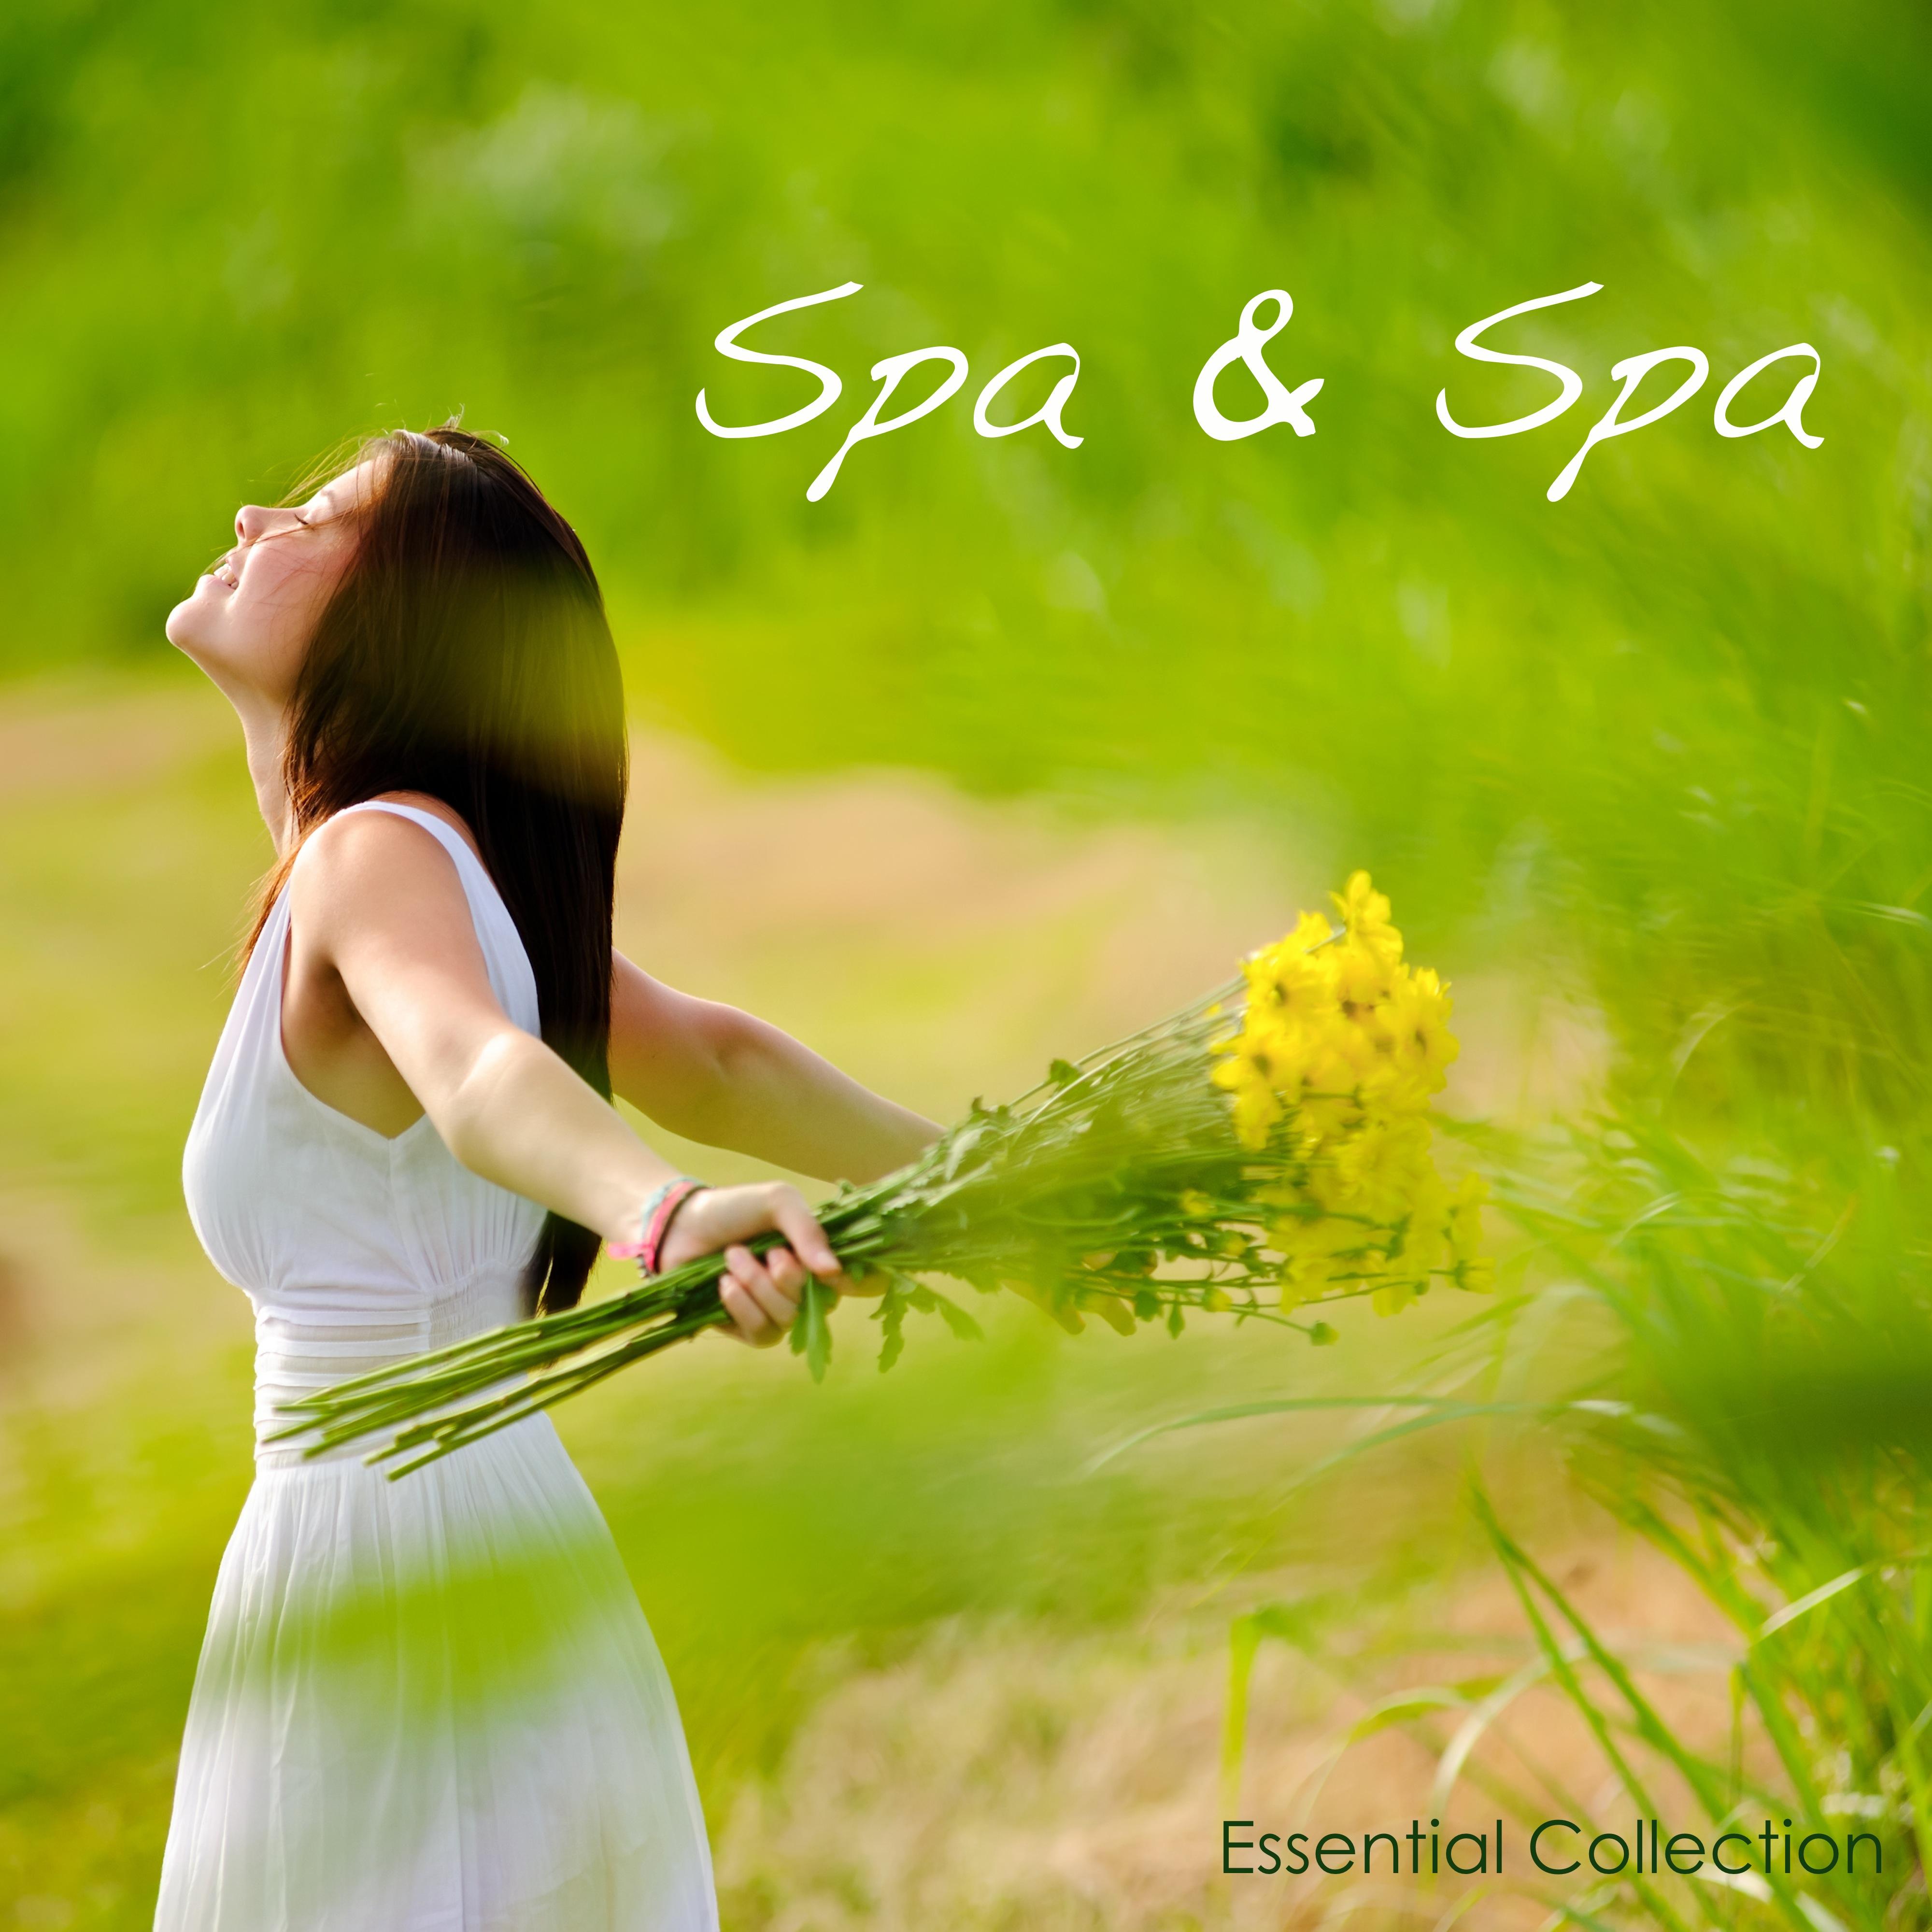 Spa & Spa - Essential Collection of Relaxing Soothing and Healing Spa Music for Relaxation and Massage